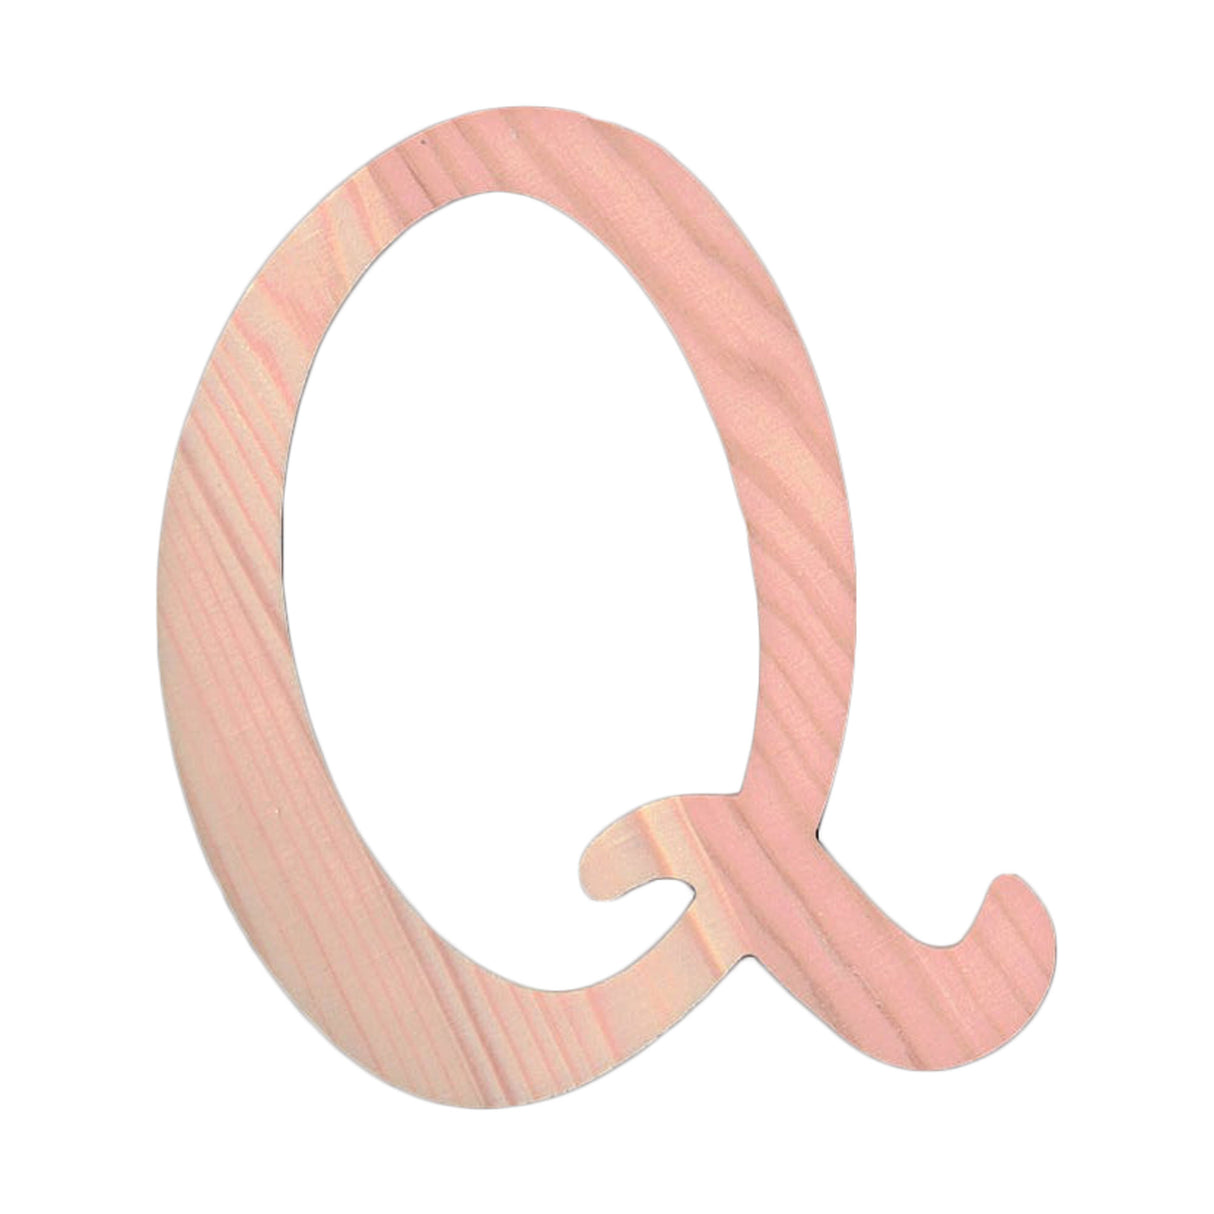 Wood Unfinished Wooden Playball Italic Letter Q (6.25 Inches) in Beige color